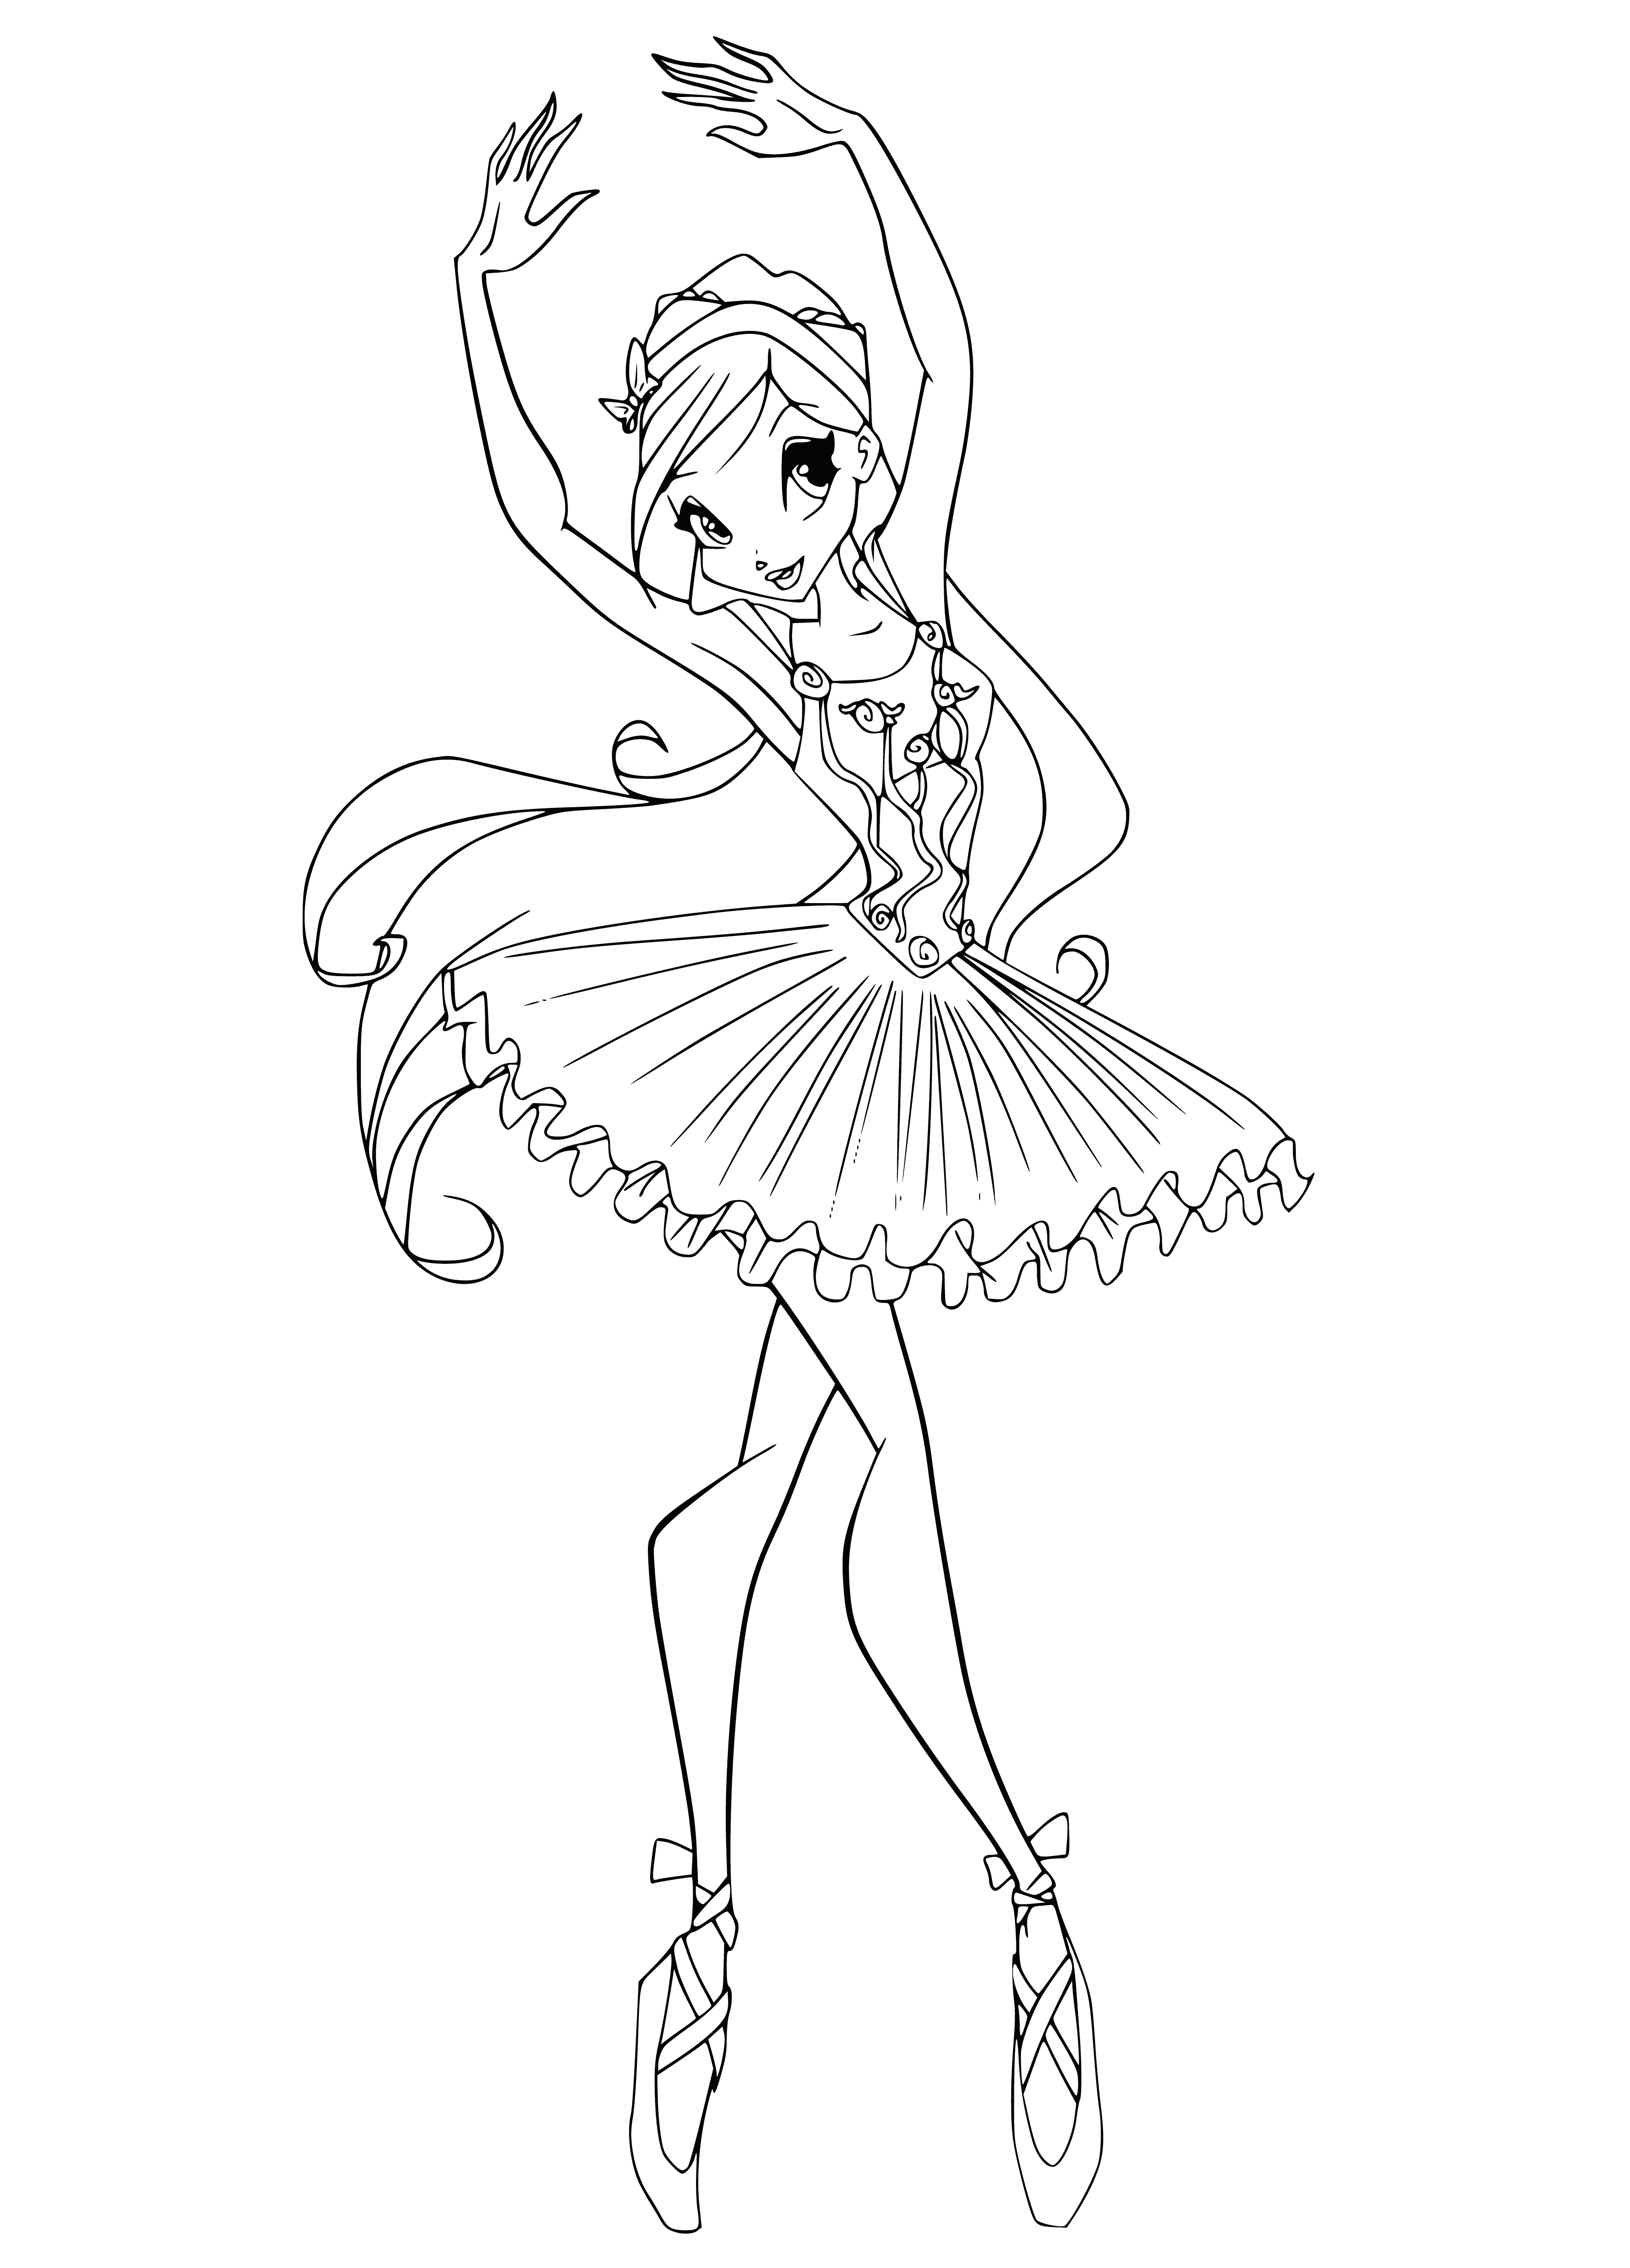 coloring page: Woman in pink dress stands on toes, one arm extended overhead, other on waist. Blond hair in a bun and pink ribbon. Serious expression.